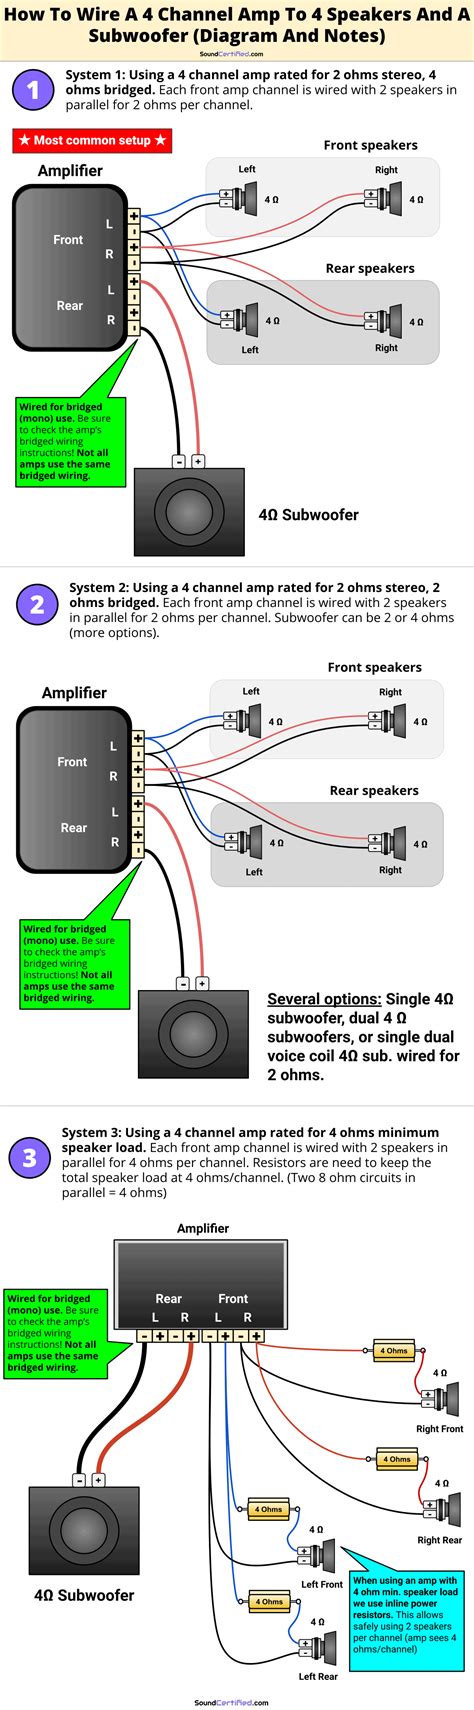 A 4 channel amp diagram uses a series of wires, including power conductors, ground wires, signal inputs, and outputs to properly route audio signals to the speakers. This diagram helps ensure that each of the four channels in your amp is connected correctly so that they all work together in harmony.. 